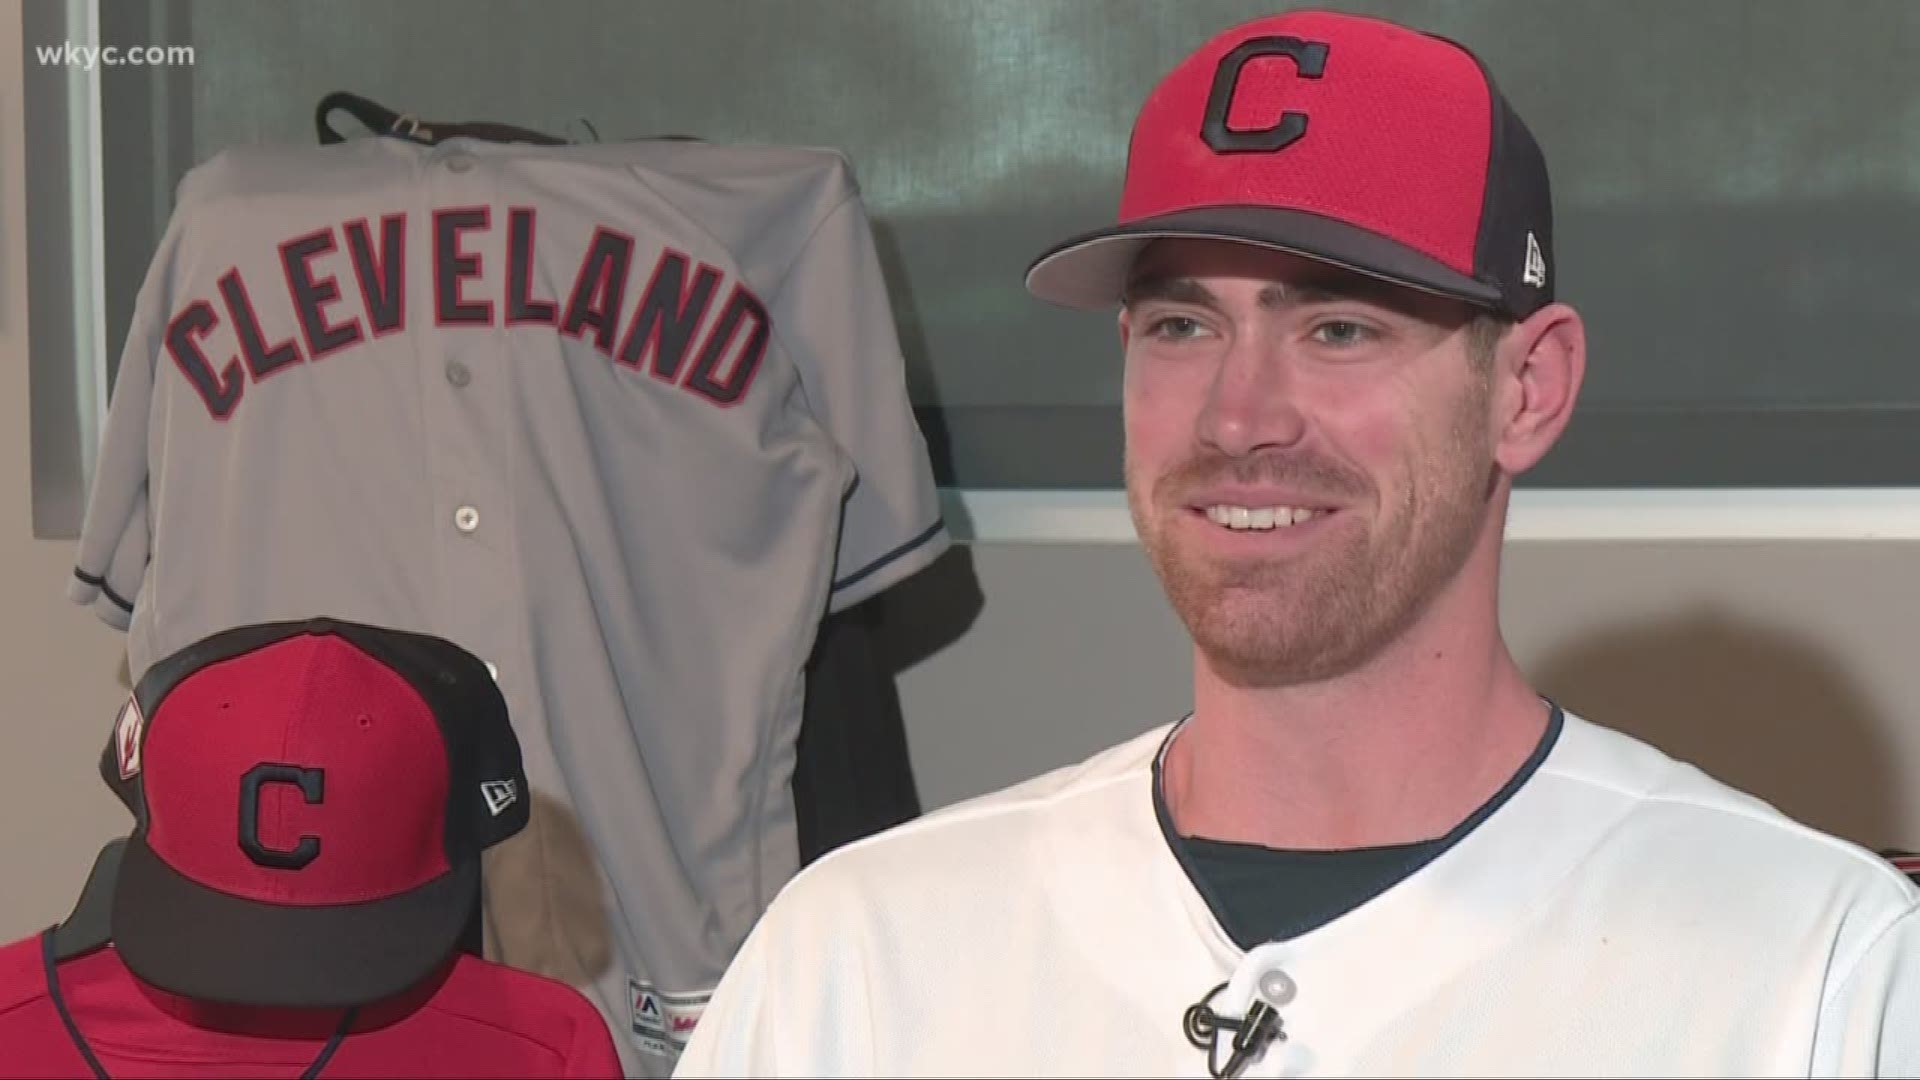 Aug. 12, 2019: It's a question he gets asked all the time... Is he related to Justin Bieber? Cleveland Indians pitcher Shane Bieber gives us the answer during our 'Beyond the Dugout' conversation.